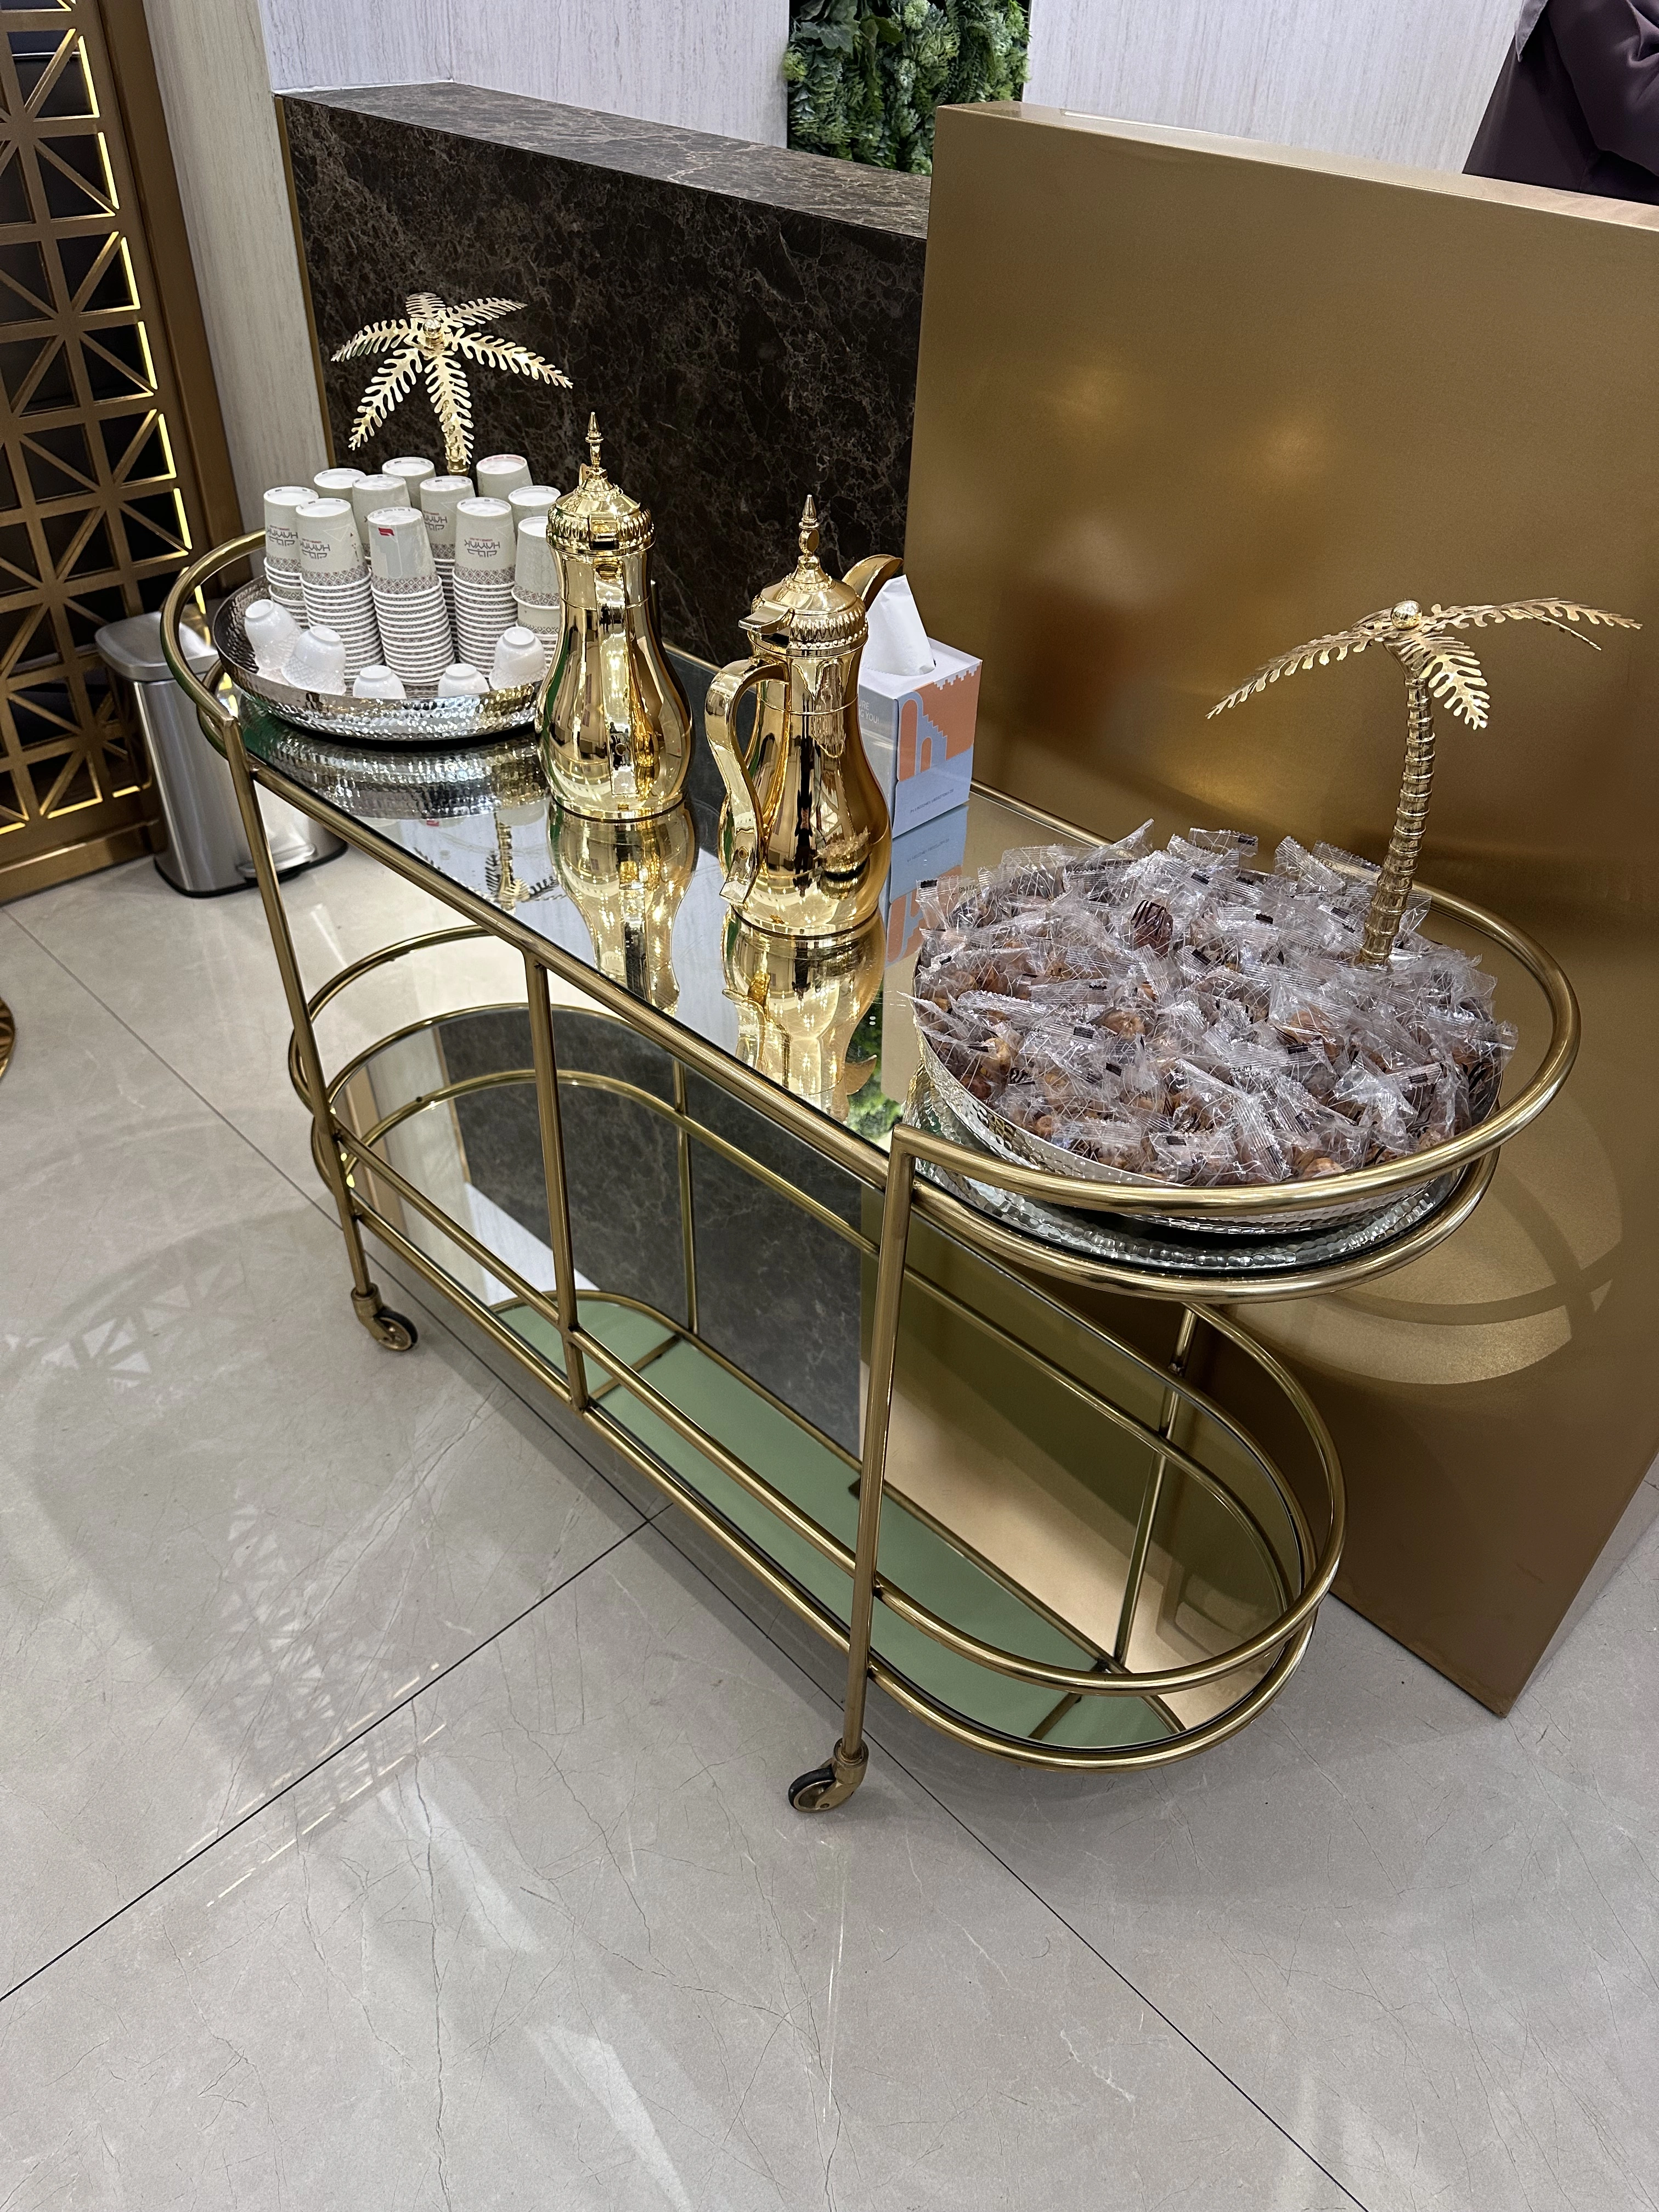 Arabic Coffee cart photo, located at the front of the Hayyak lounge